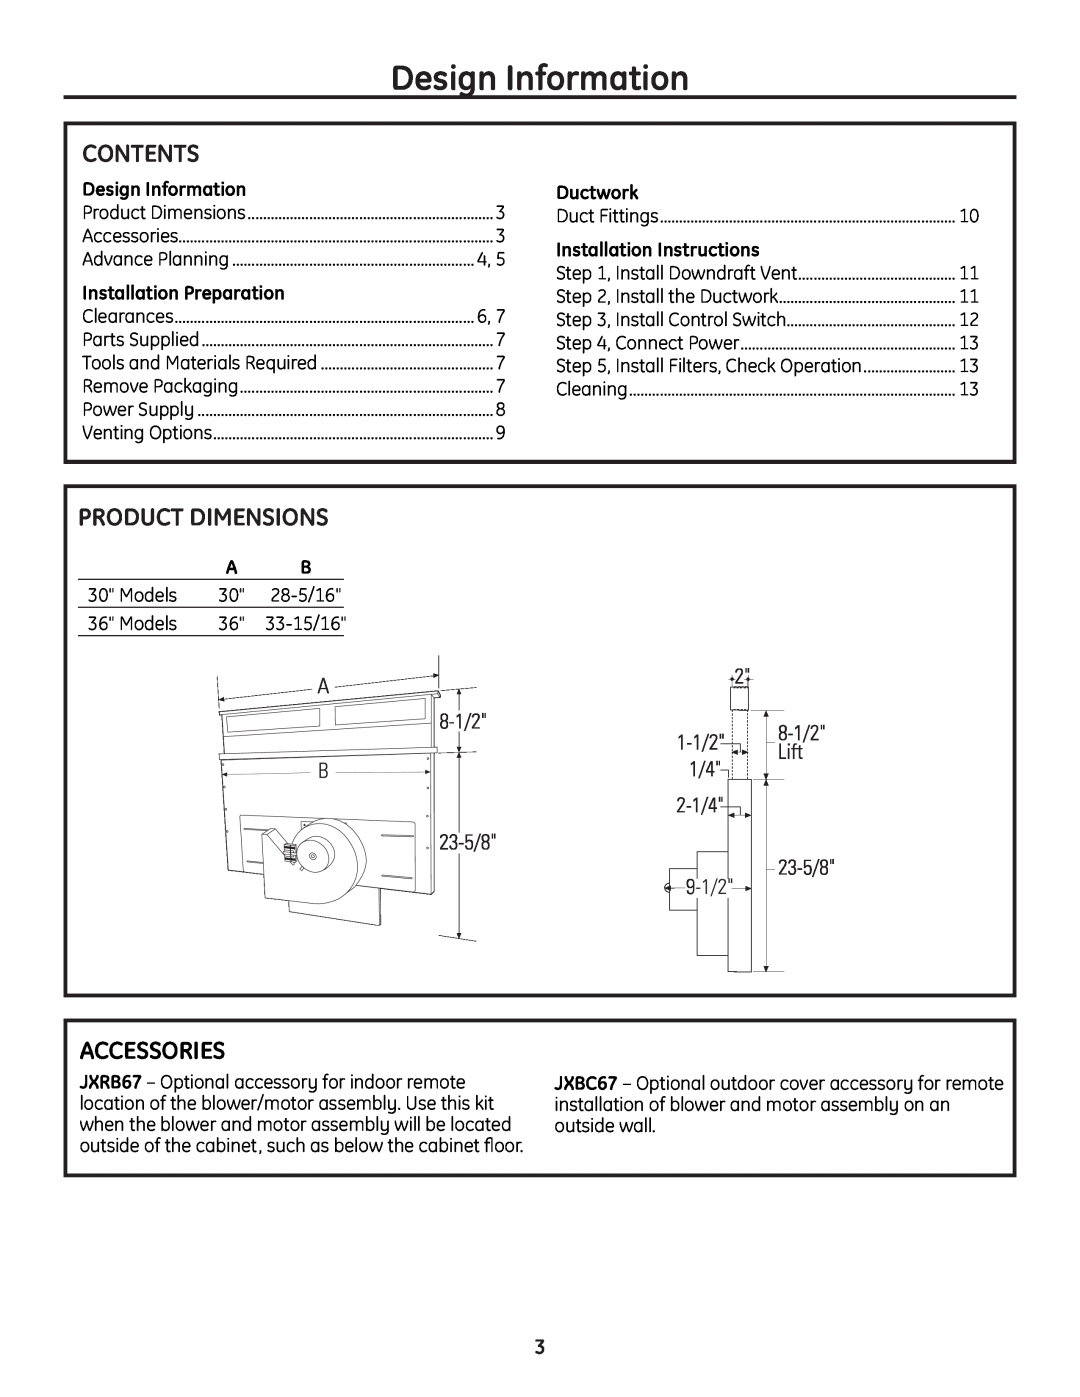 GE PVB67 Design Information, Contents, Product Dimensions, Accessories, Ductwork, Installation Instructions, Duct Fittings 